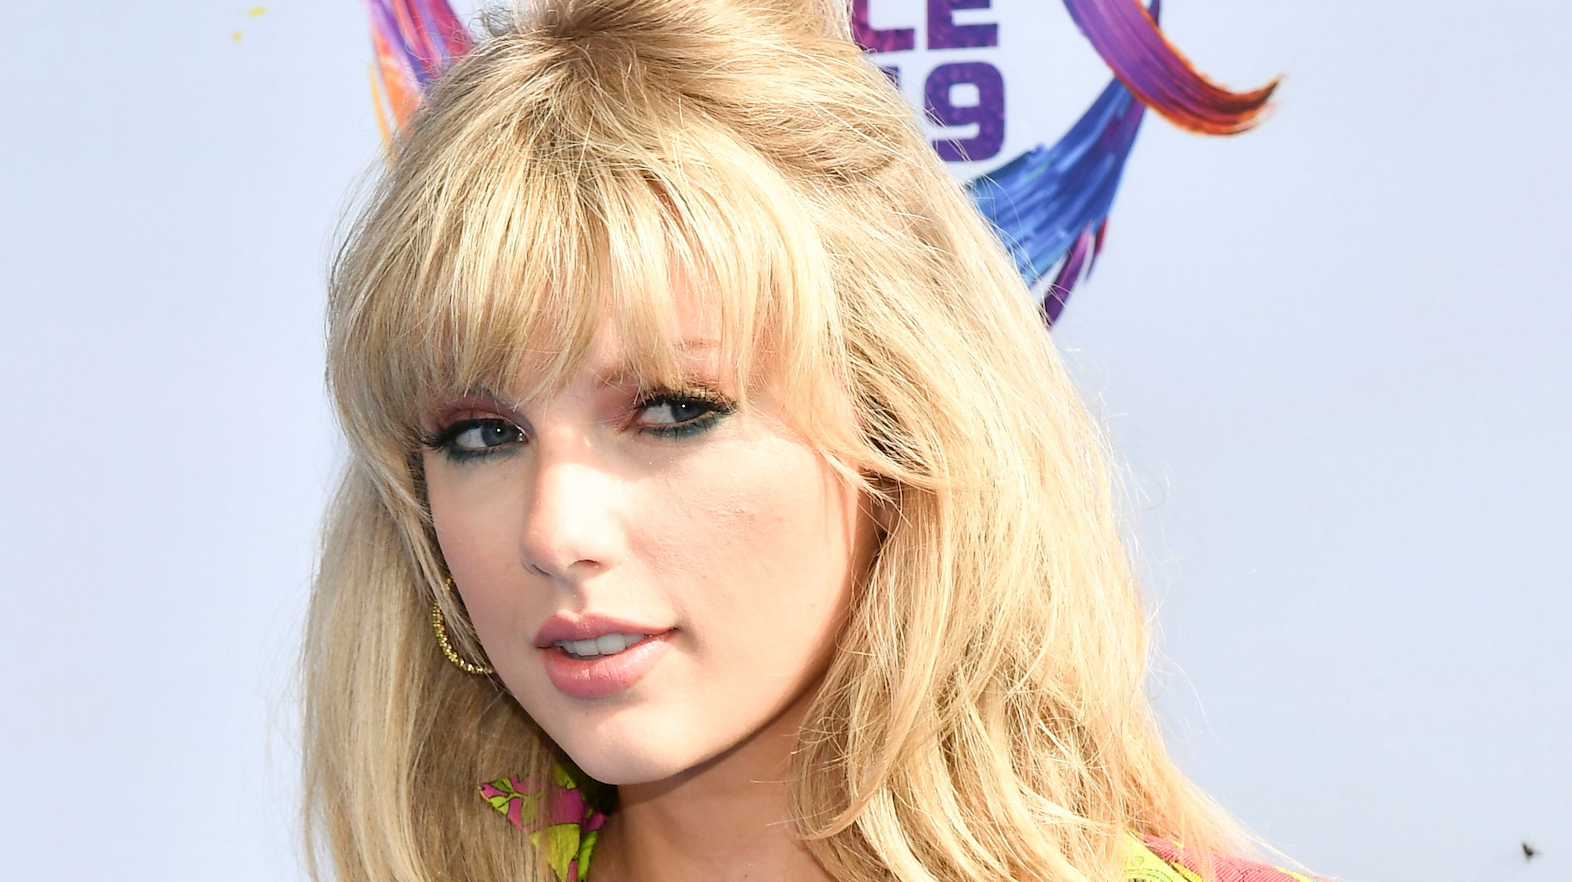 Taylor Swifts Teen Choice Awards Speech See What She Said